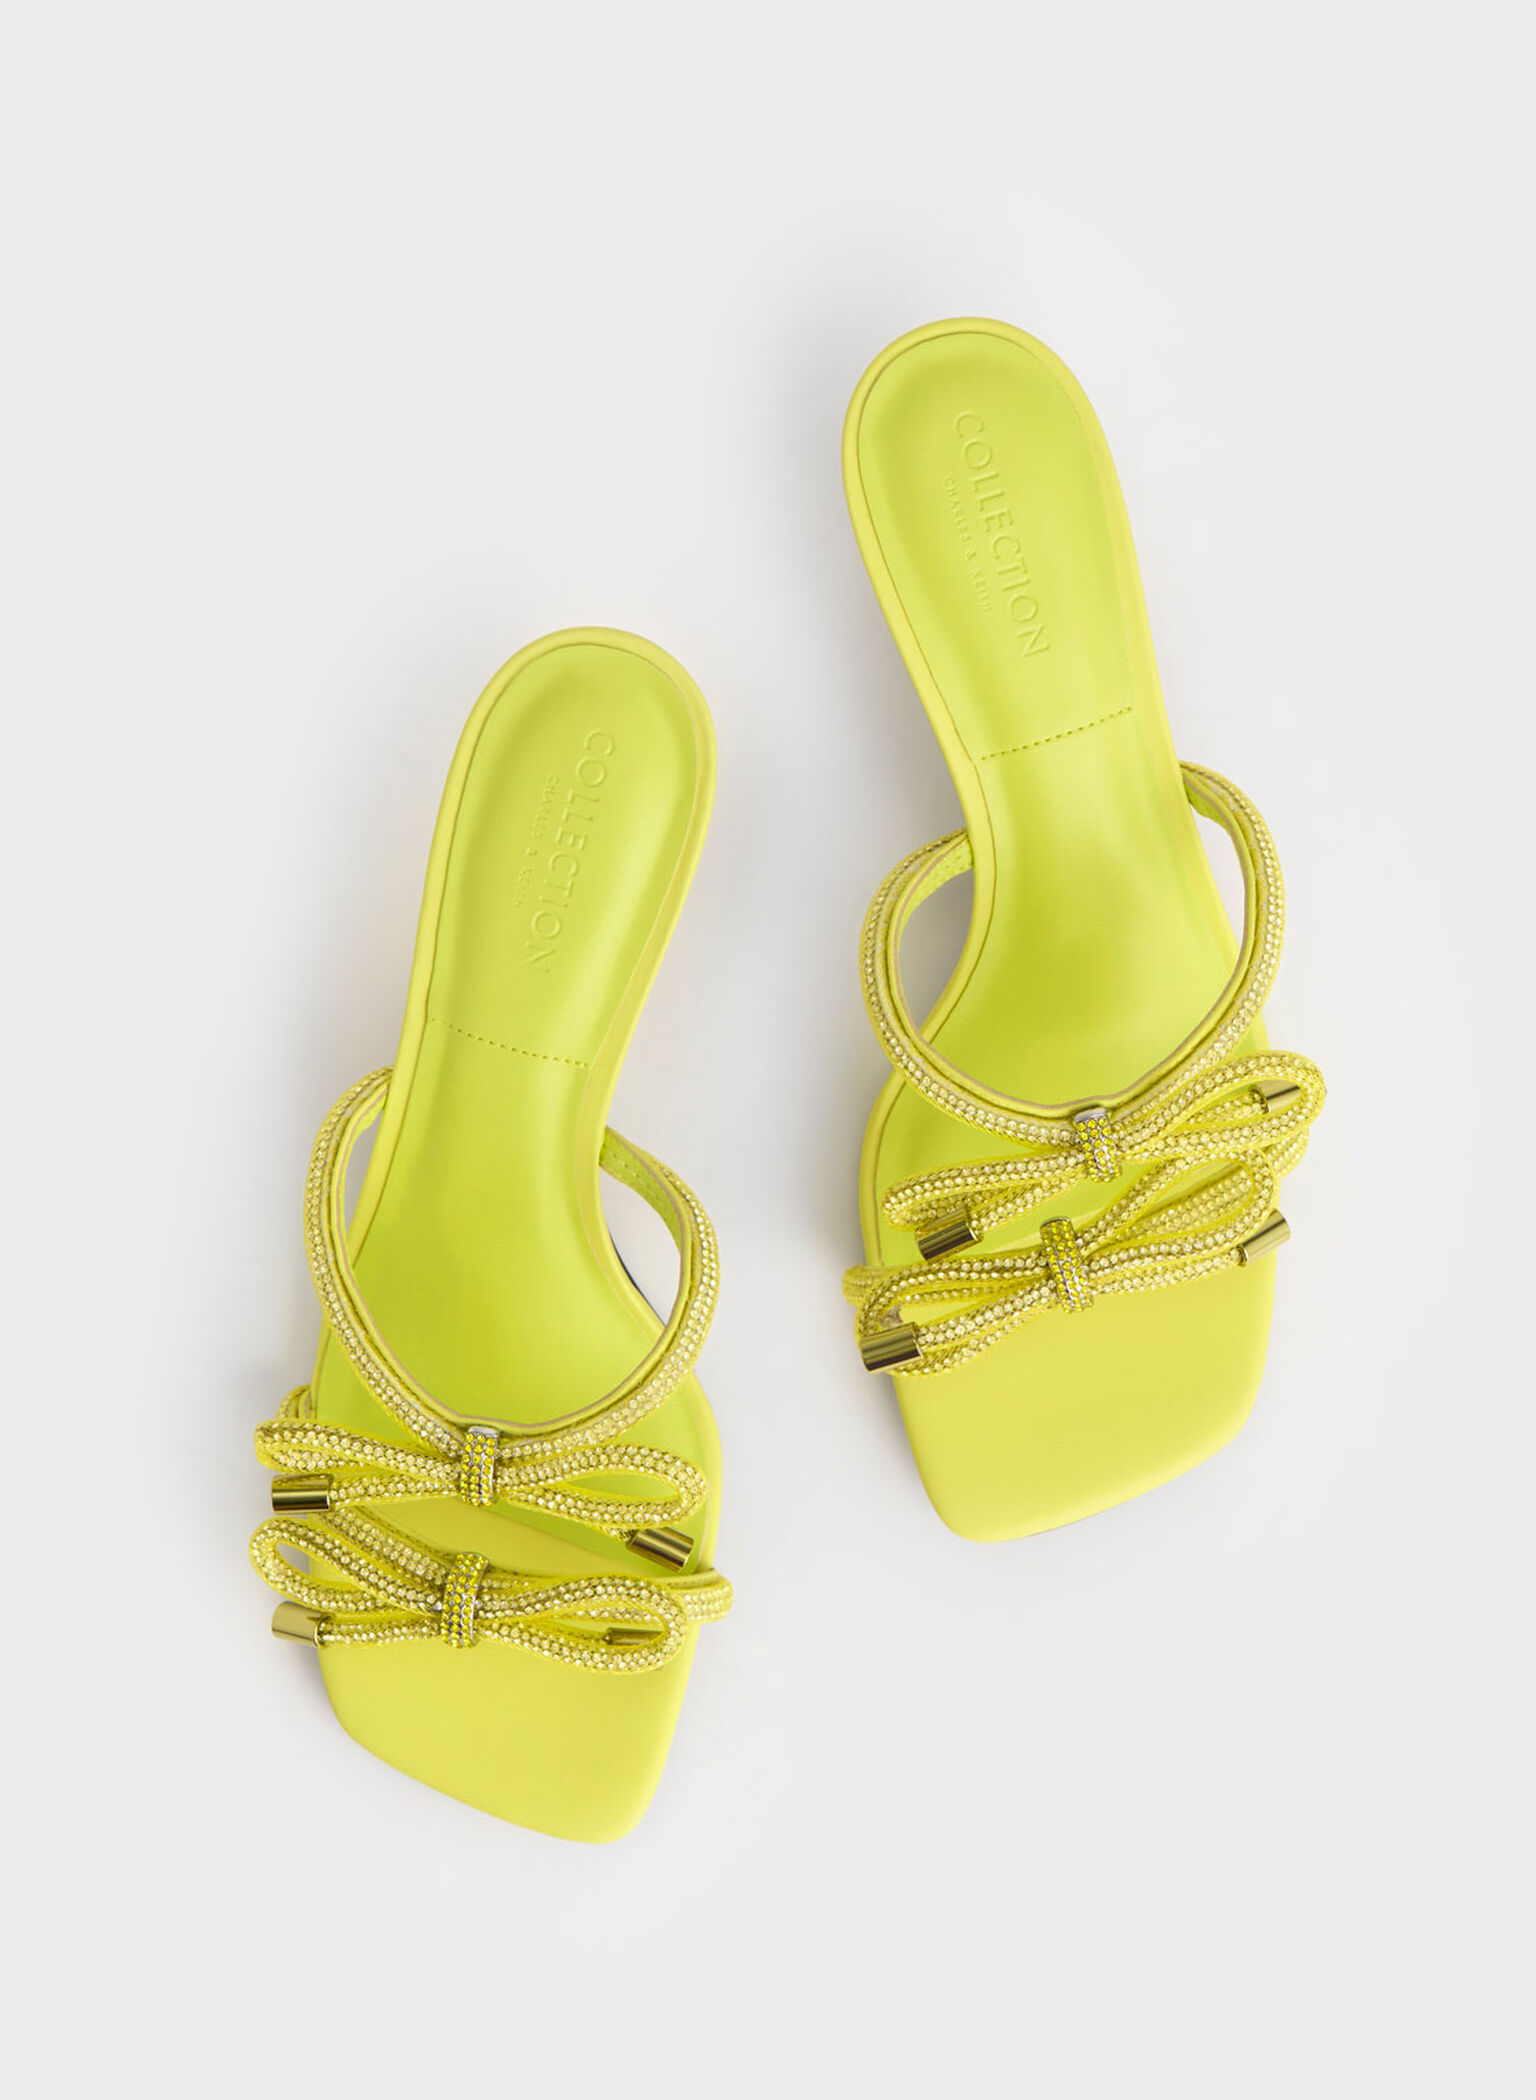 Gem-Embellished Bow-Tie Mules, Yellow, hi-res